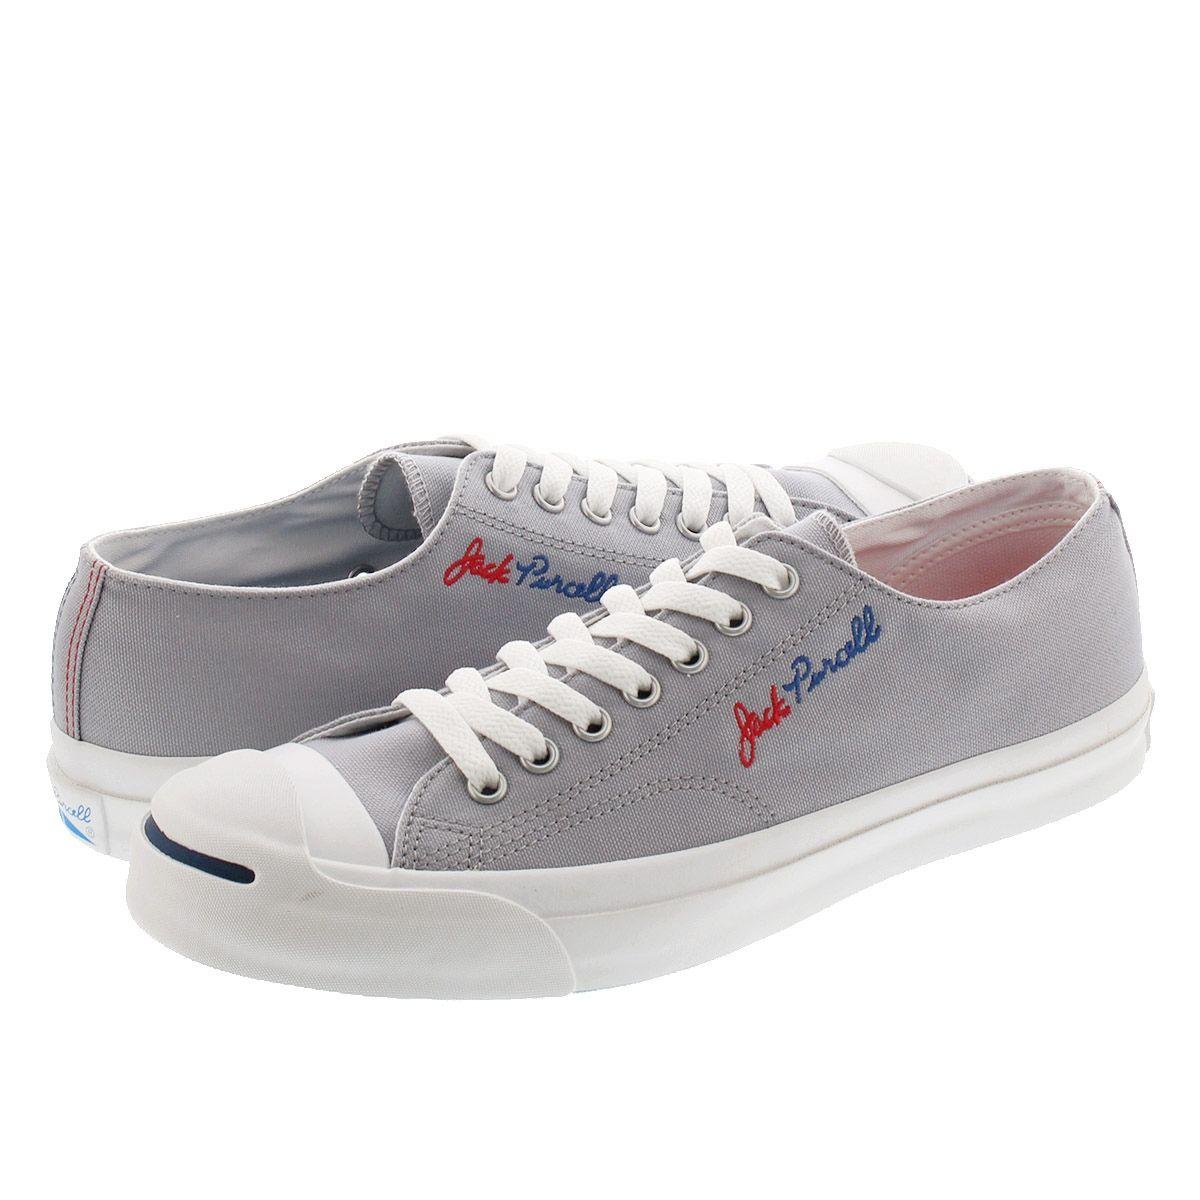 Purcell Logo - CONVERSE JACK PURCELL LOGOSTITCH RH Converse Jack Pursel logo stitch RH  GREY 33300051